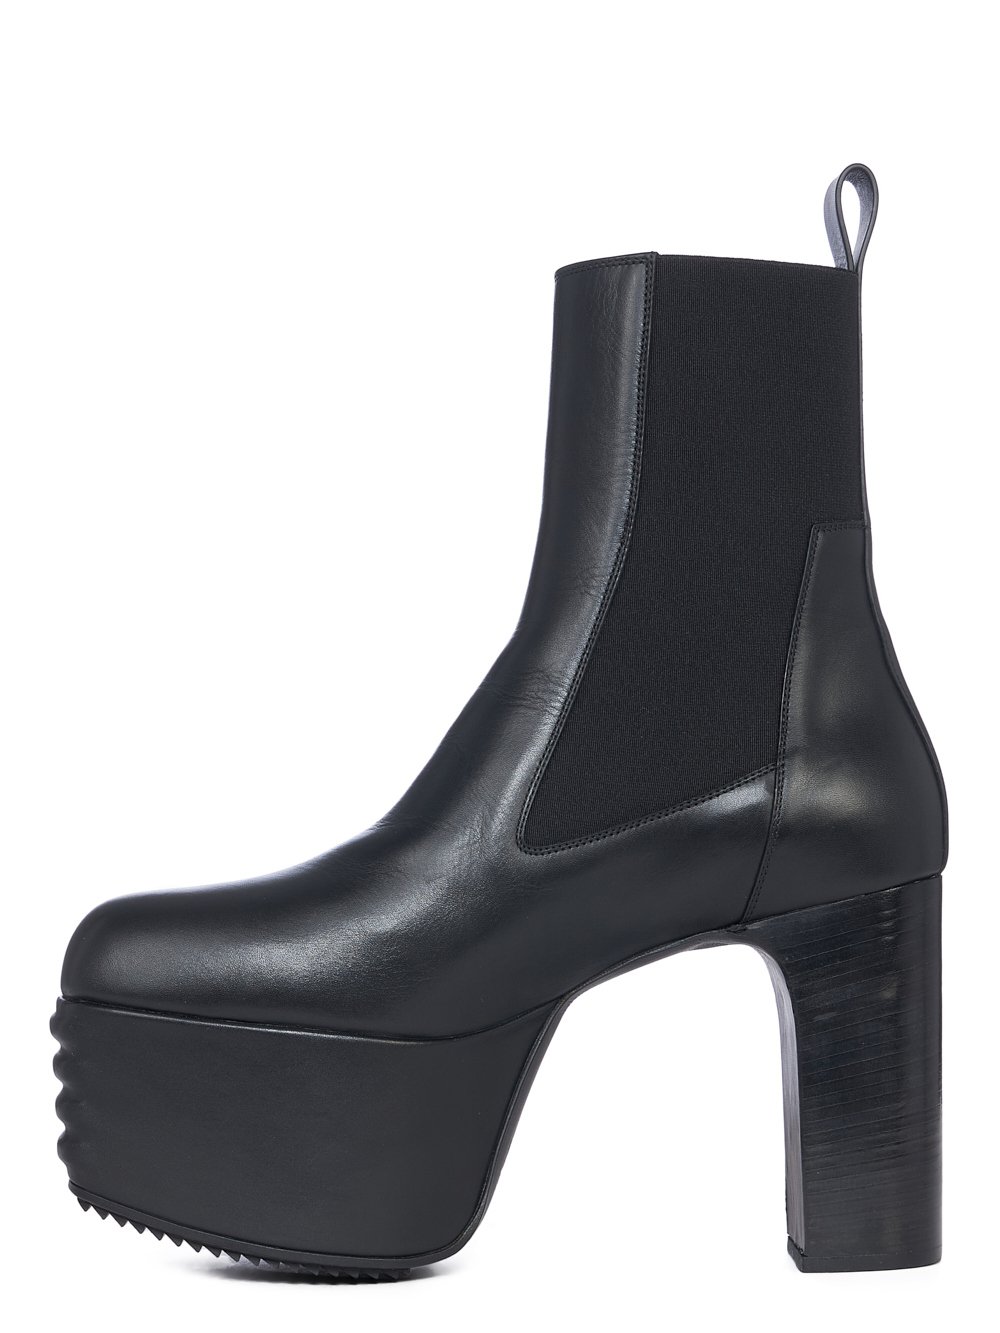 RICK OWENS FW23 LUXOR MINIMAL GRILL PLATFORMS 45 IN BLACK CORTINA GREASE CALF LEATHER